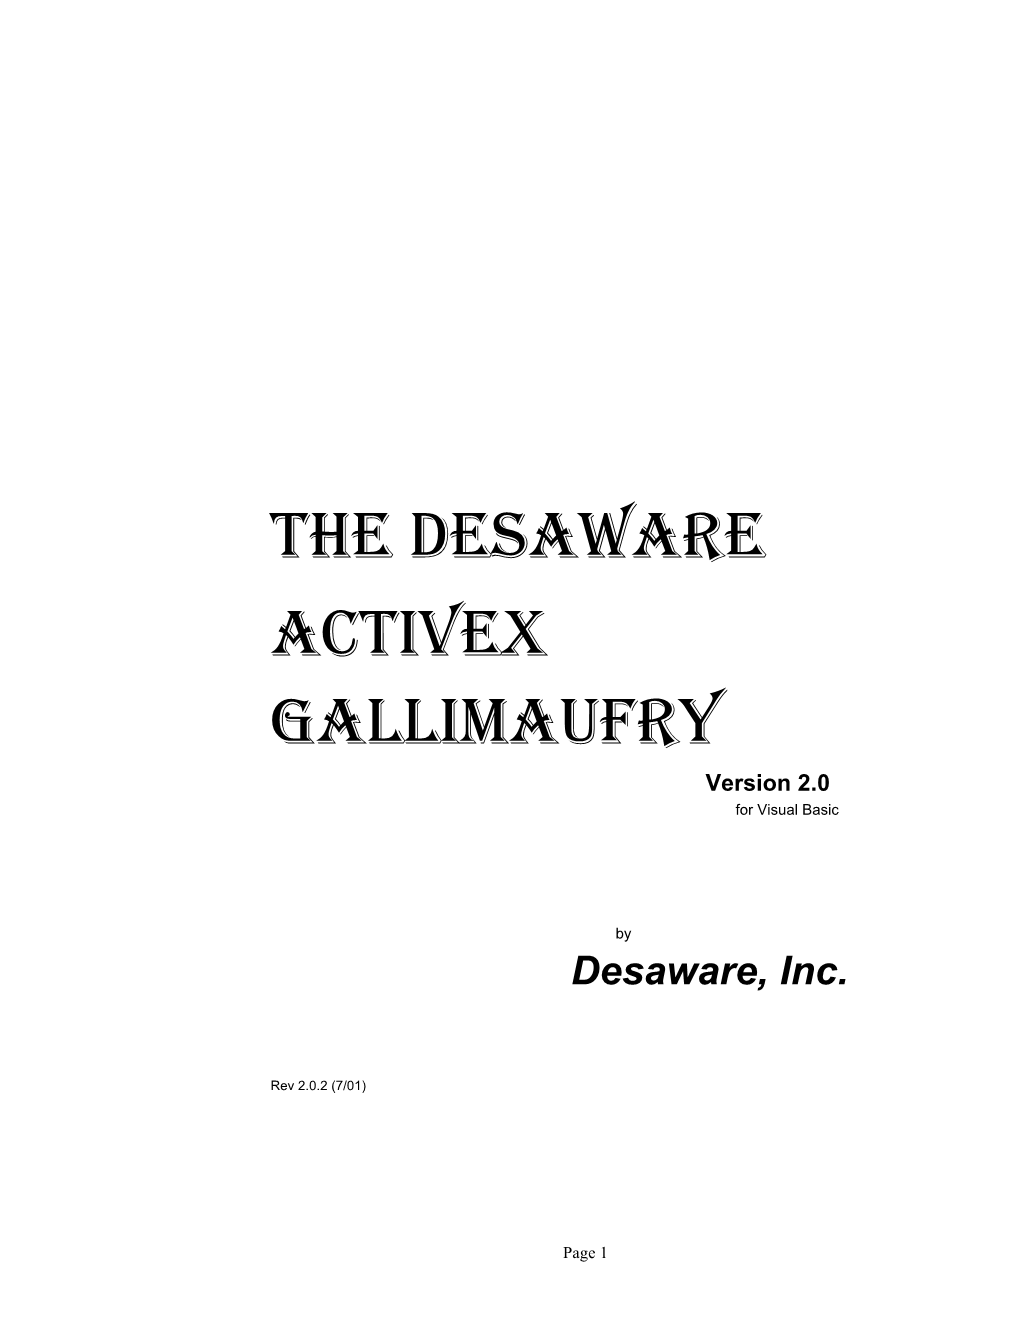 THE DESAWARE ACTIVEX GALLIMAUFRY Version 2.0 for Visual Basic